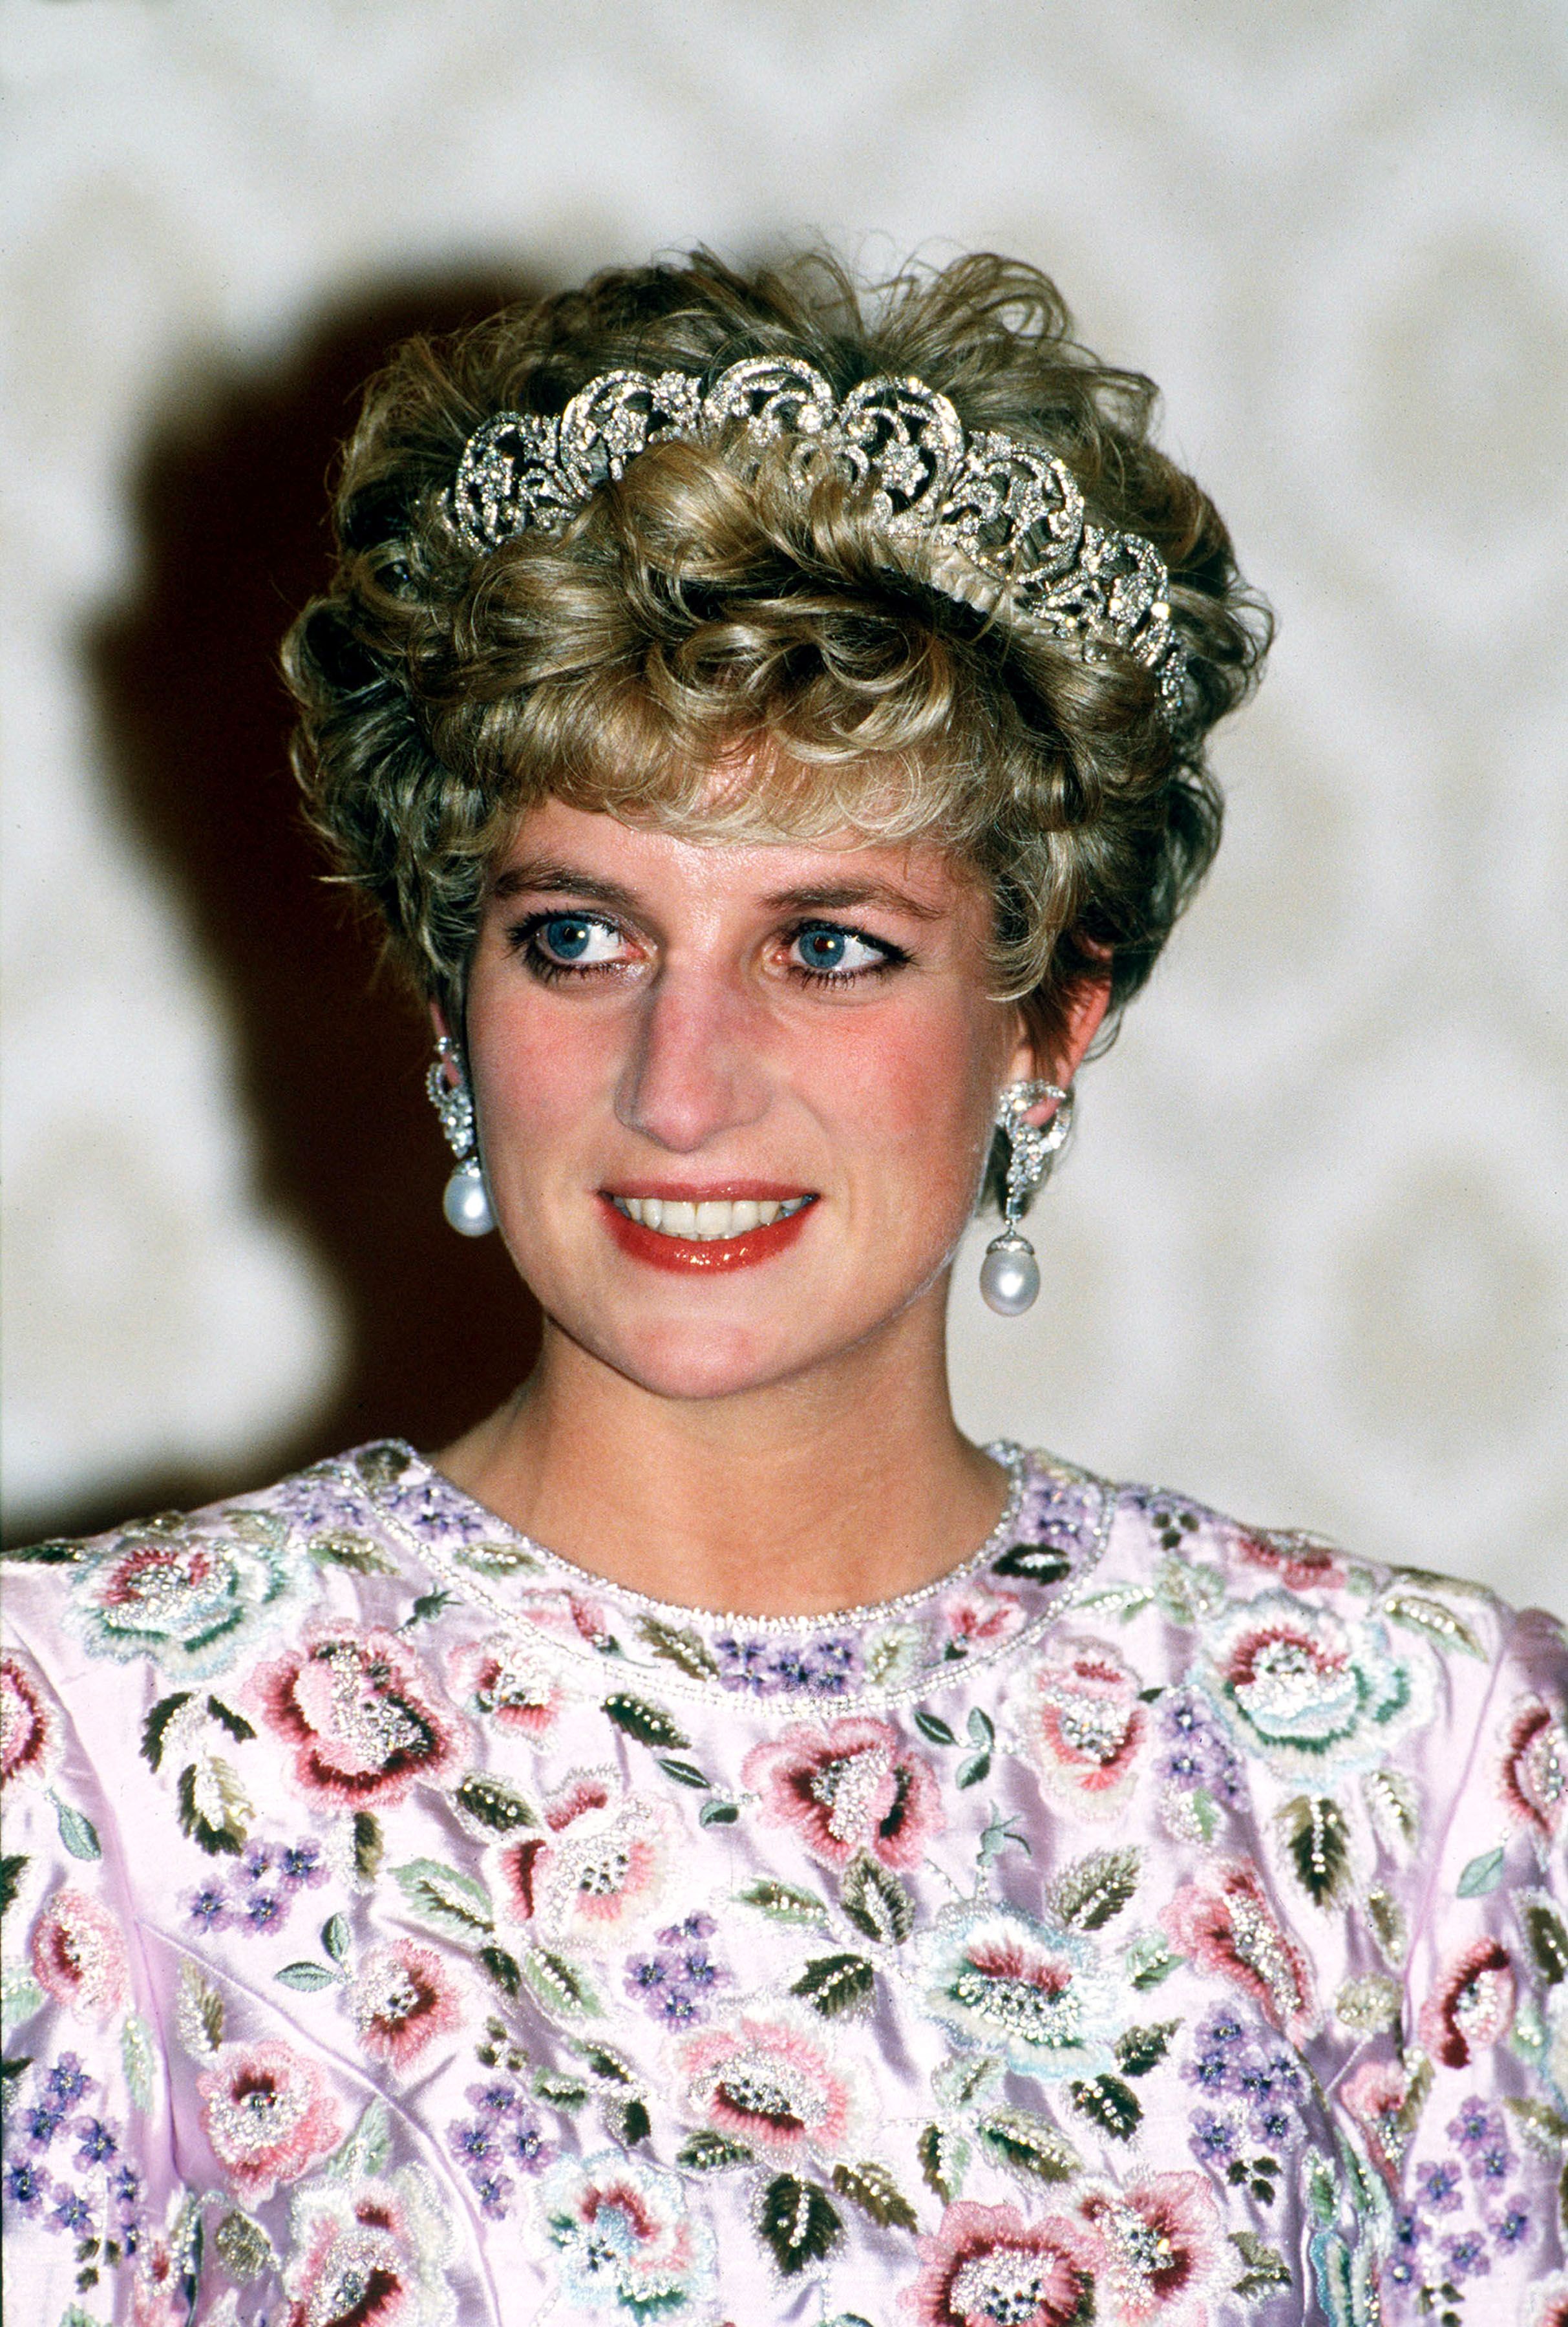 Princess Dianas Hair Though the Year  Diana Princess of Wales Style